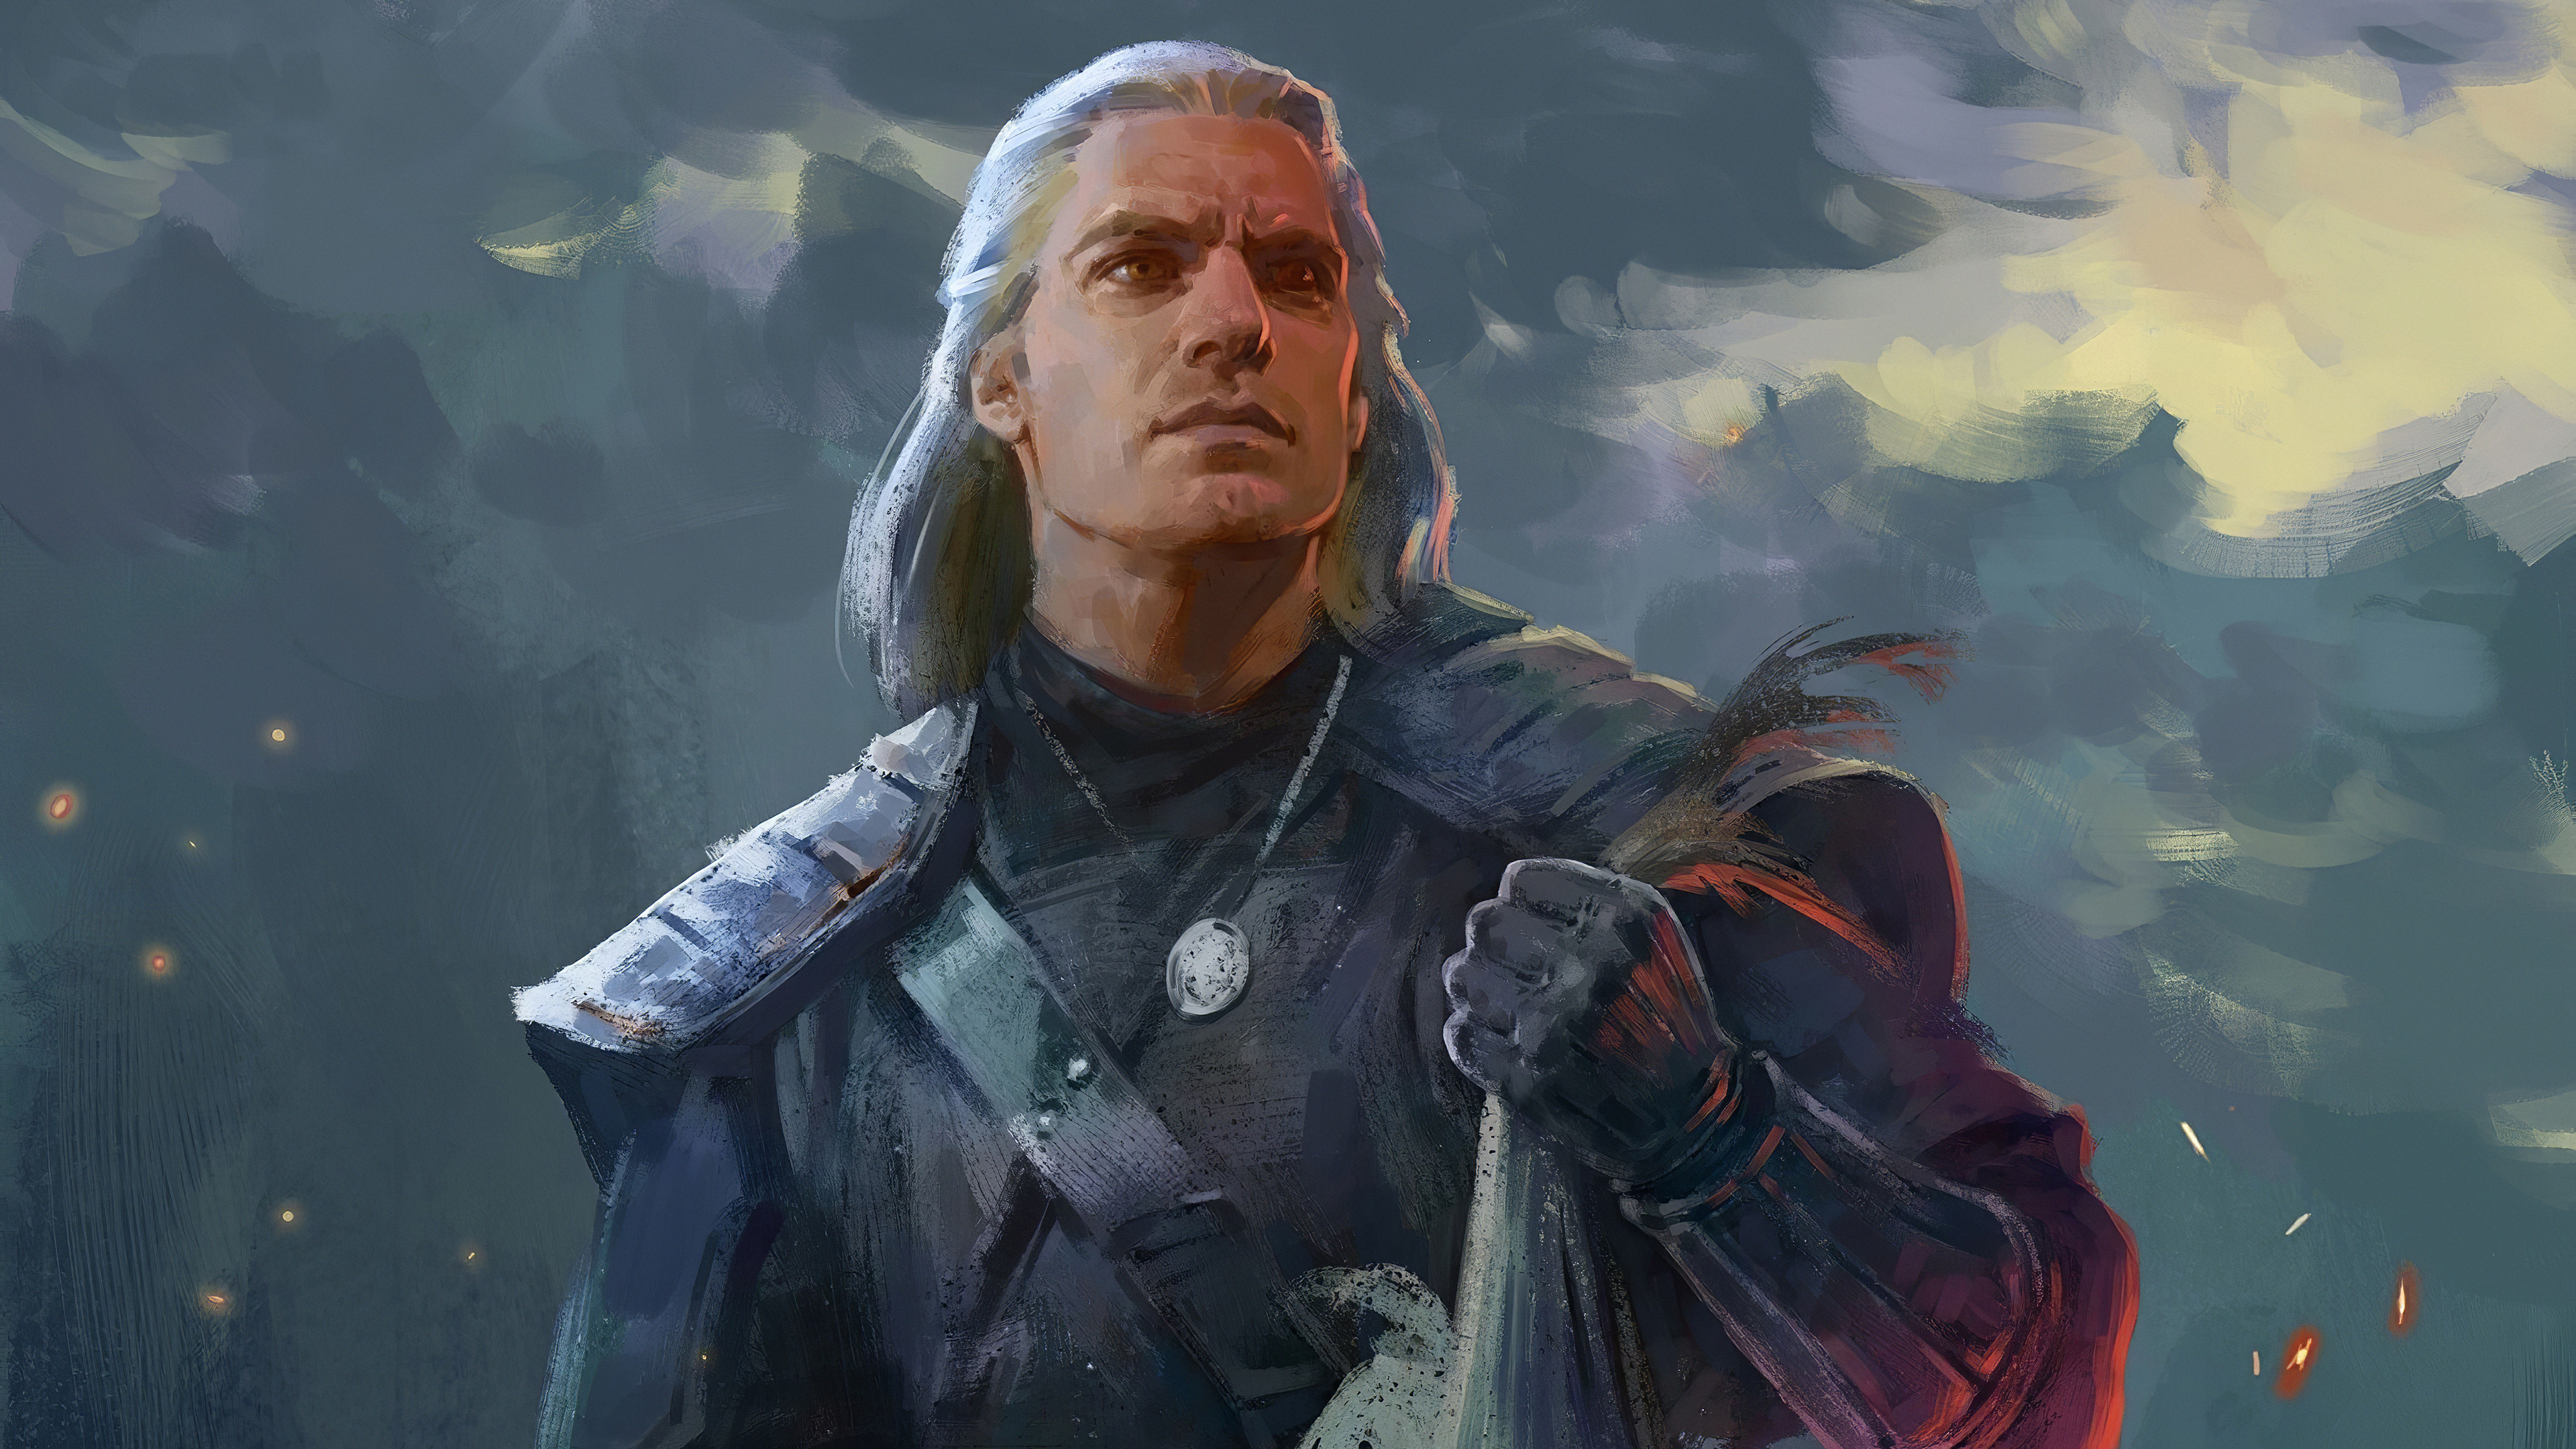 Free photo Drawing of a character from the game Witcher